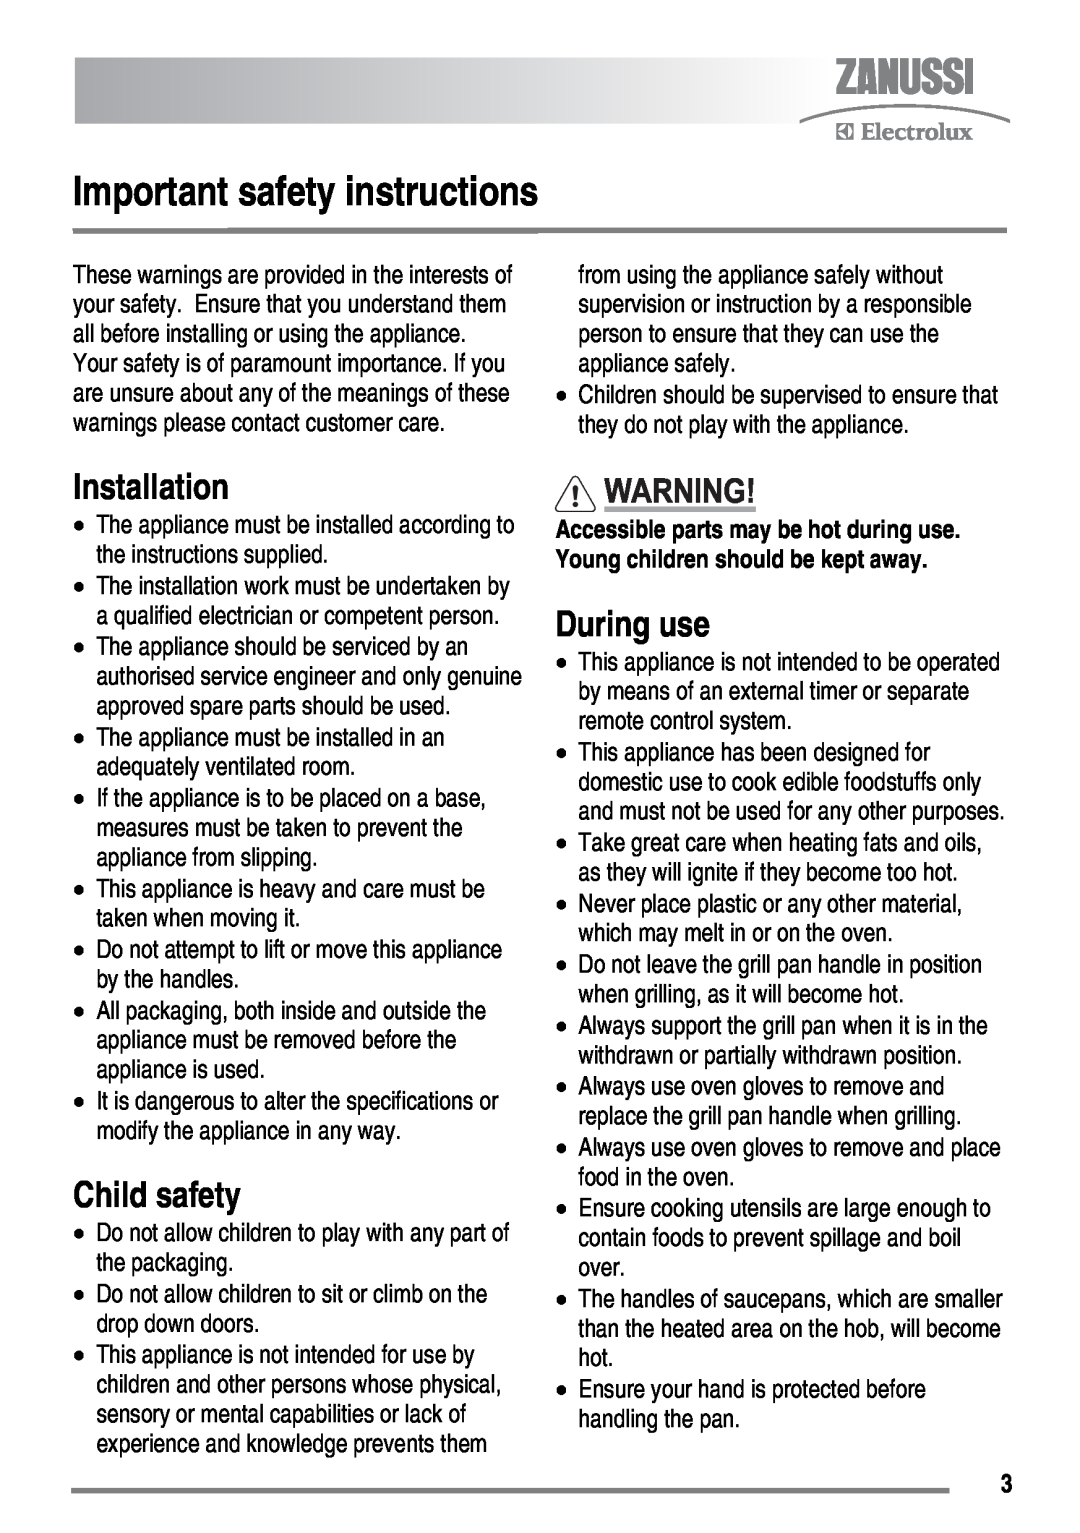 Zanussi ZKT6050 user manual Important safety instructions, Installation, Child safety, During use 